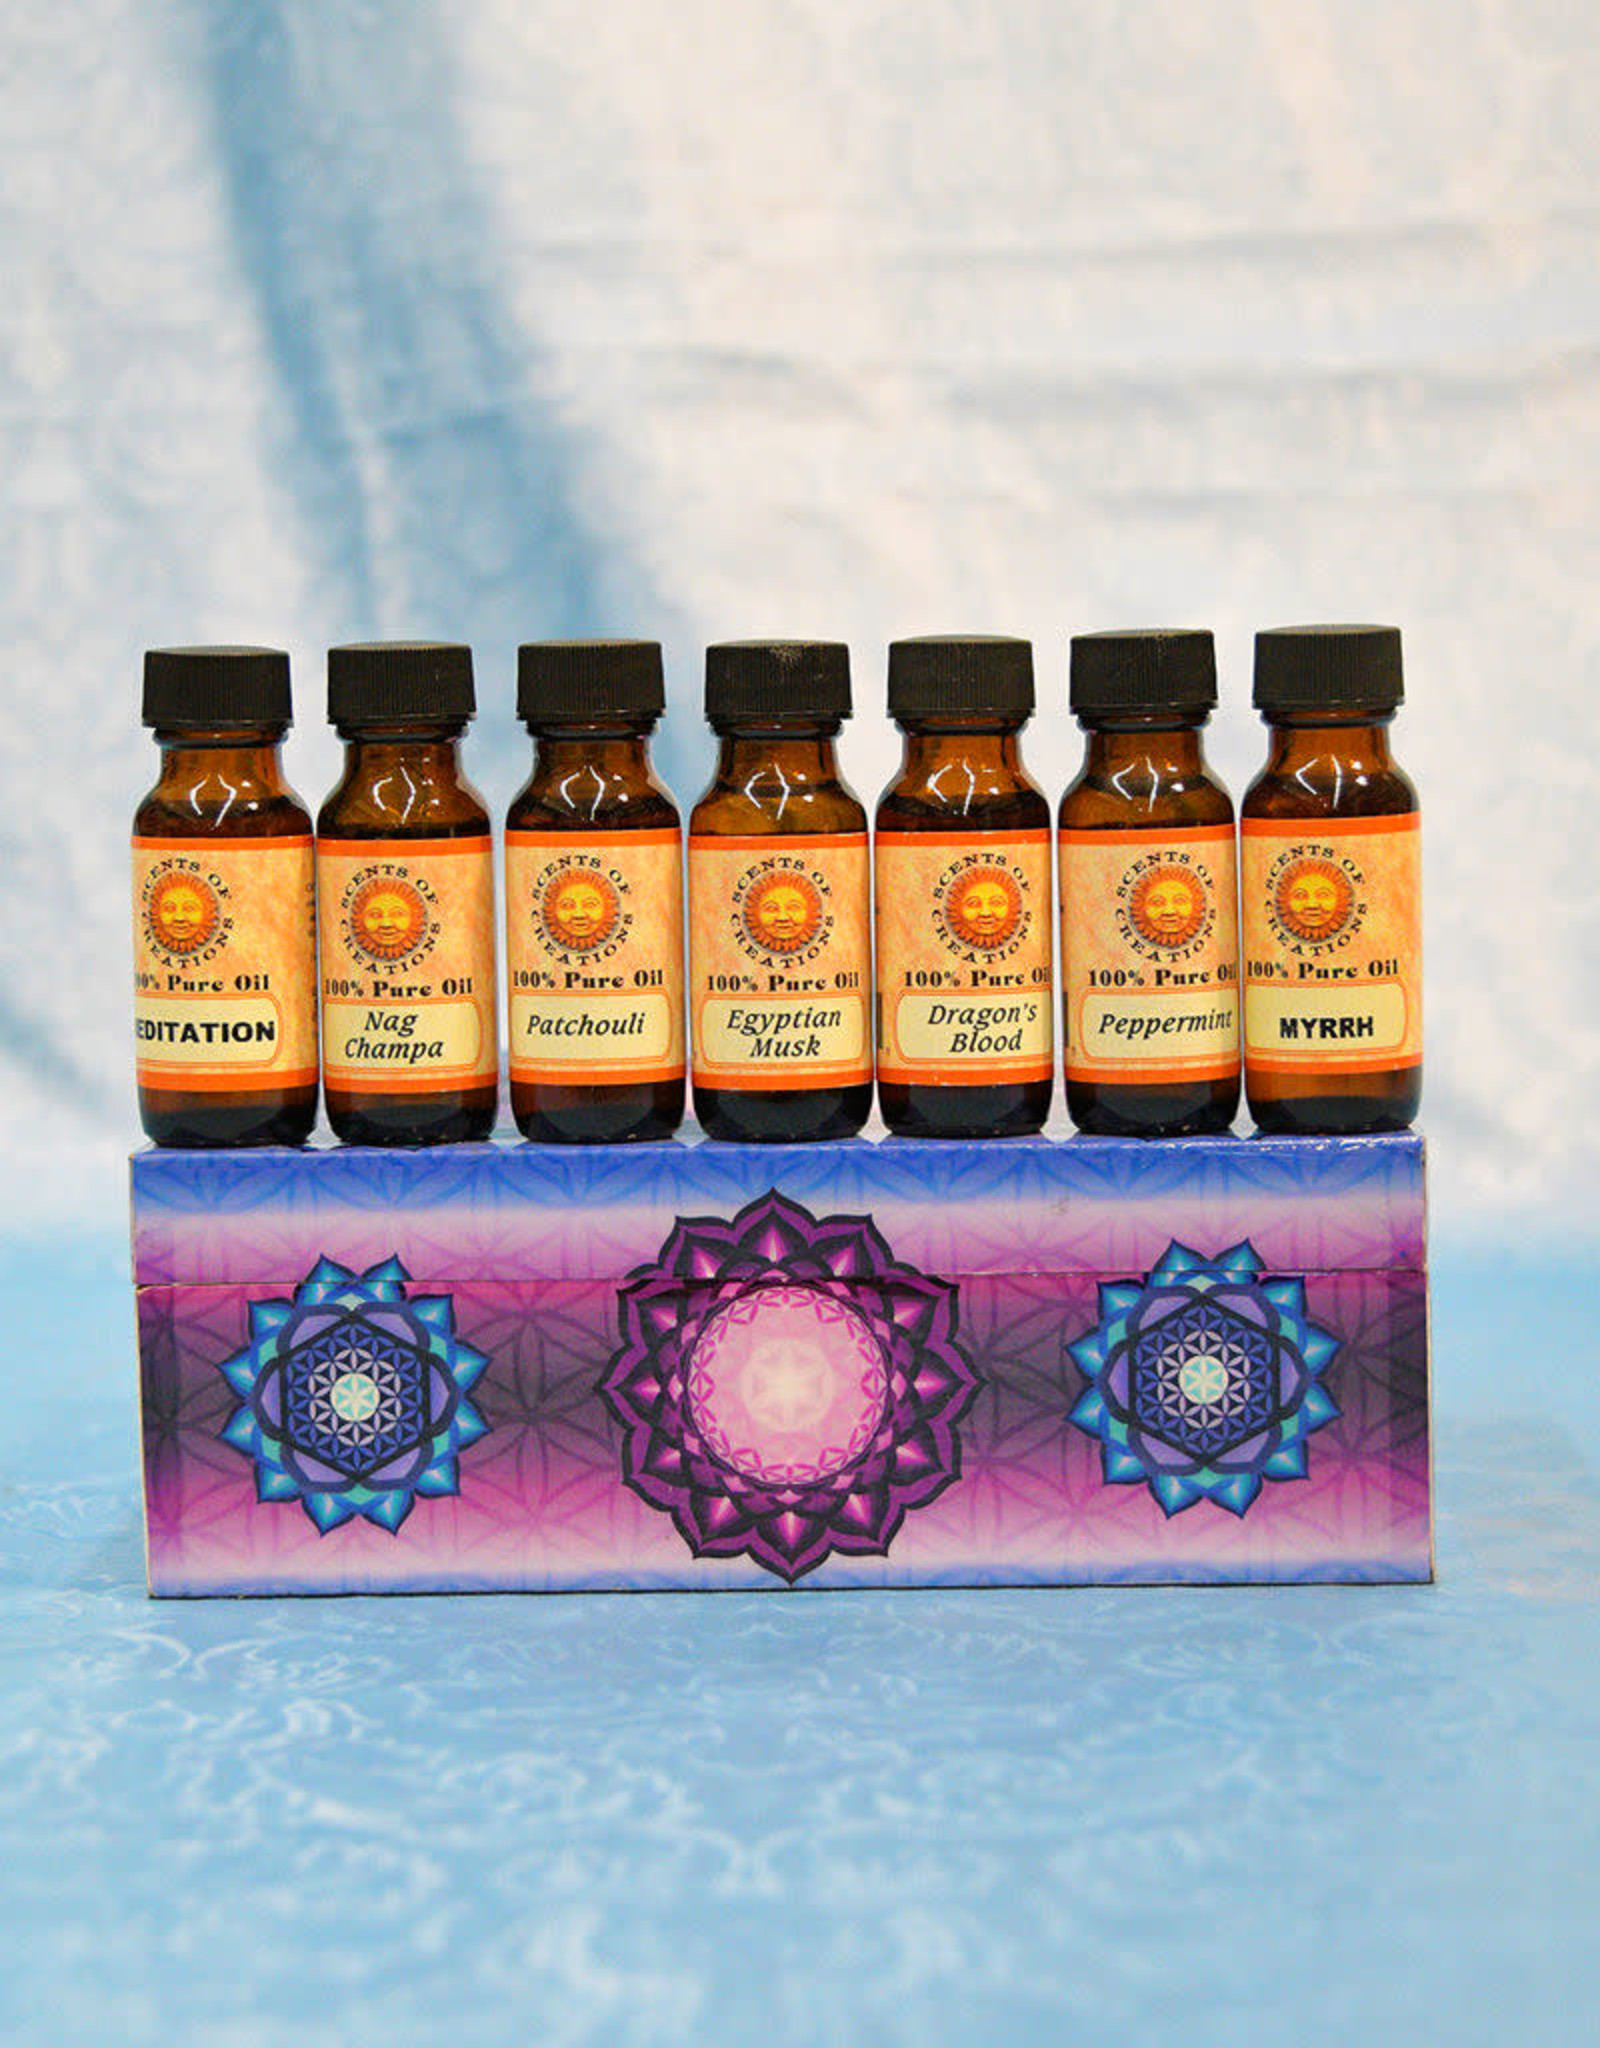 Scents of Creations Scents of Creations Fragrance Oil - Heavenly Scents